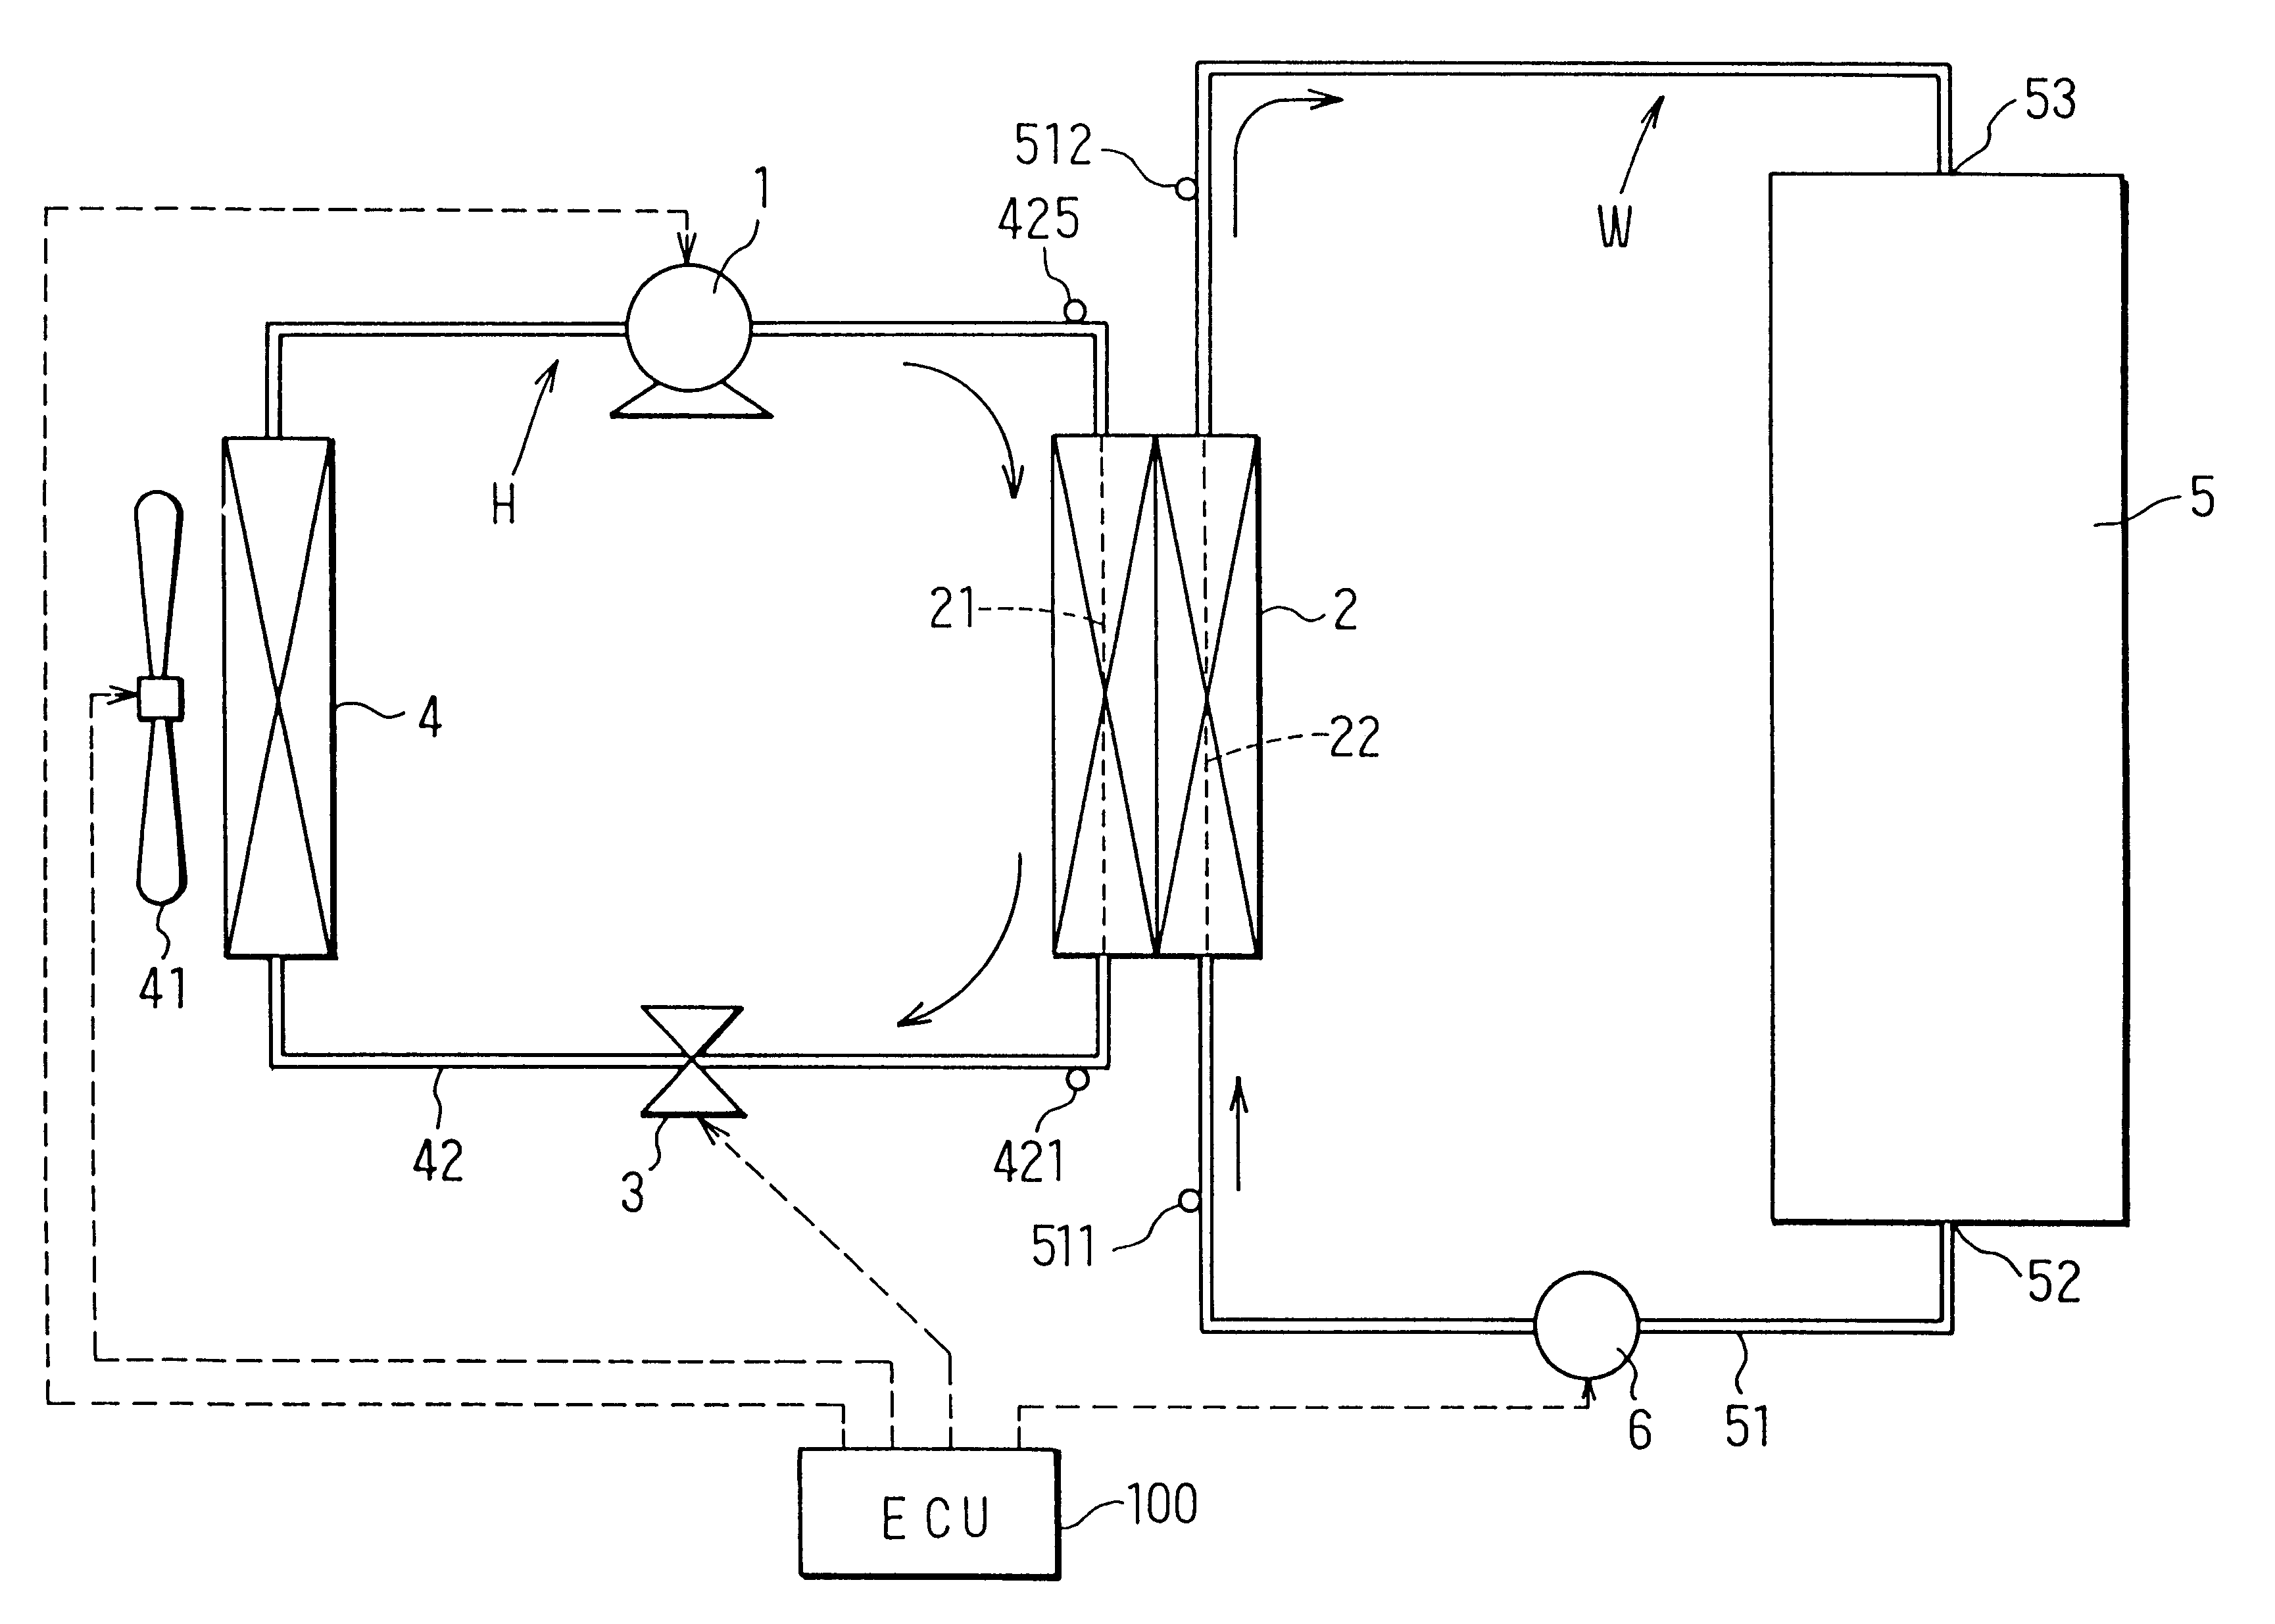 Hot-water supply system with heat pump cycle